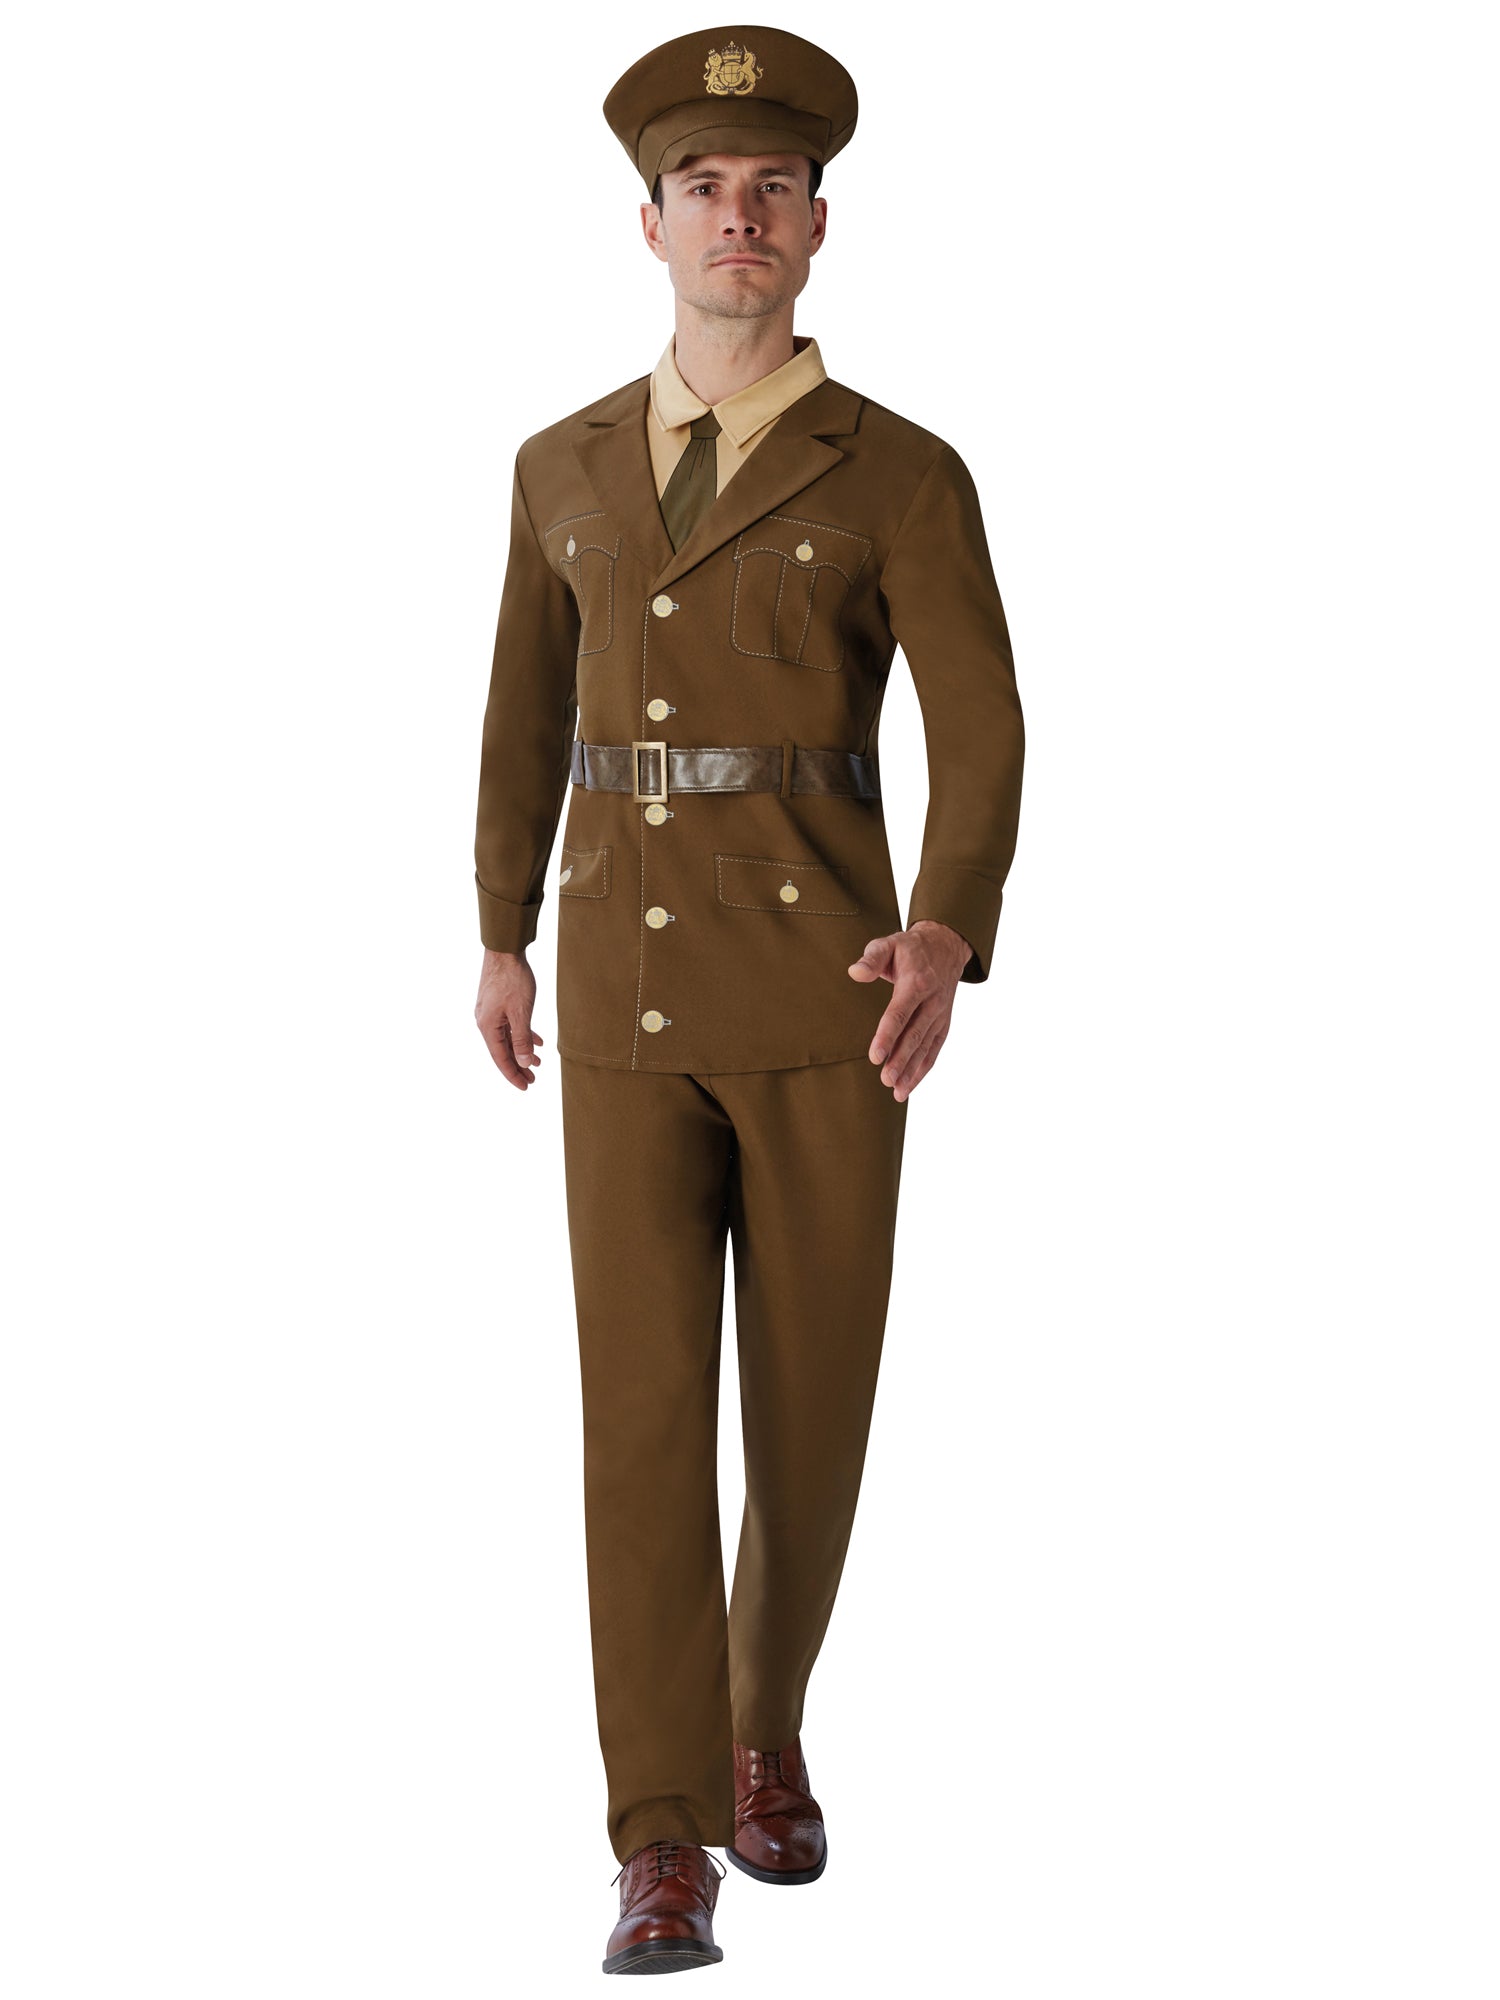 Army, Multi, Generic, Adult Costume, Extra Large, Front